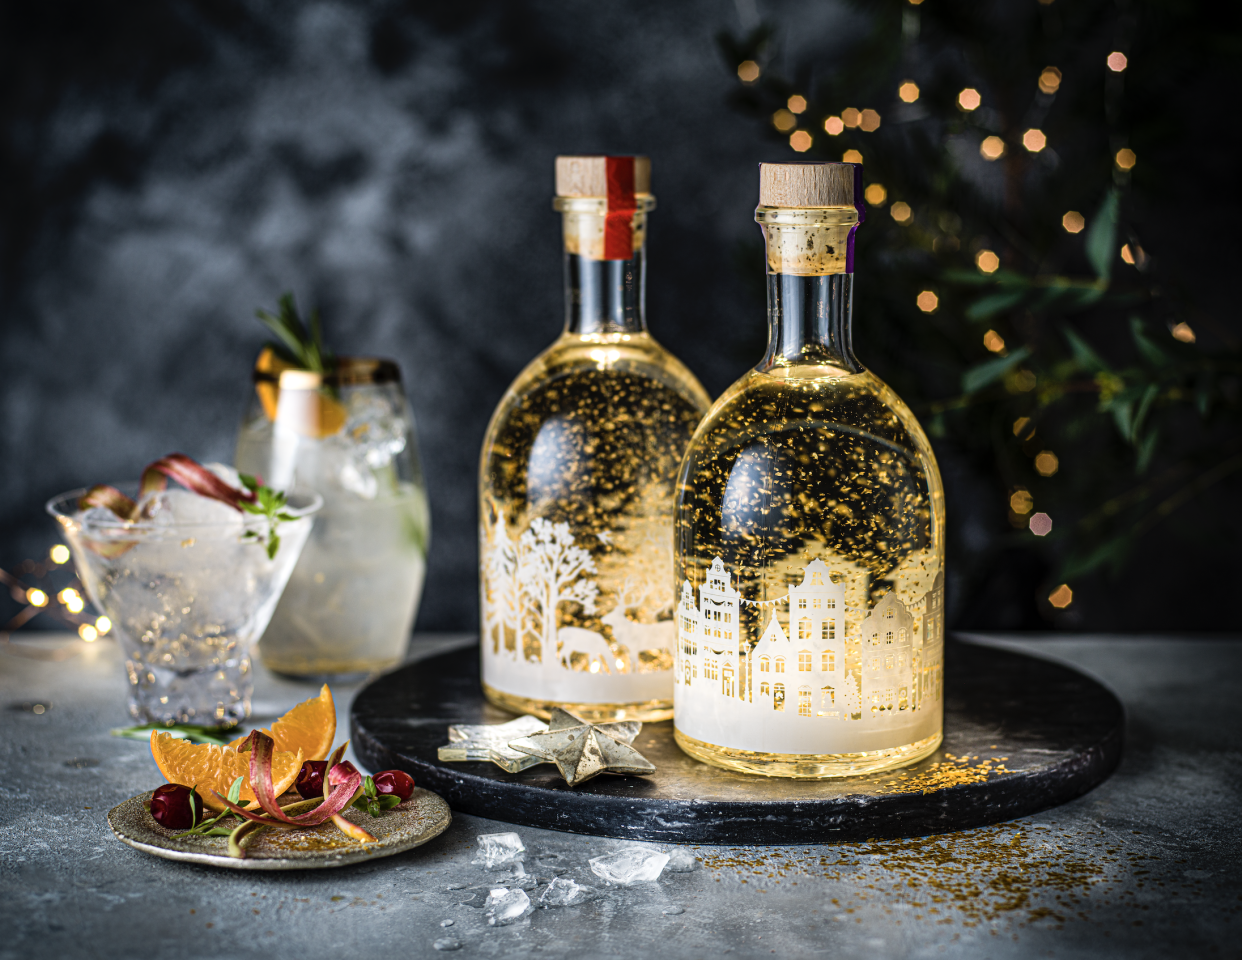 Expect a scramble for M&S snow globe gin with added sparkle this year. (M&S)